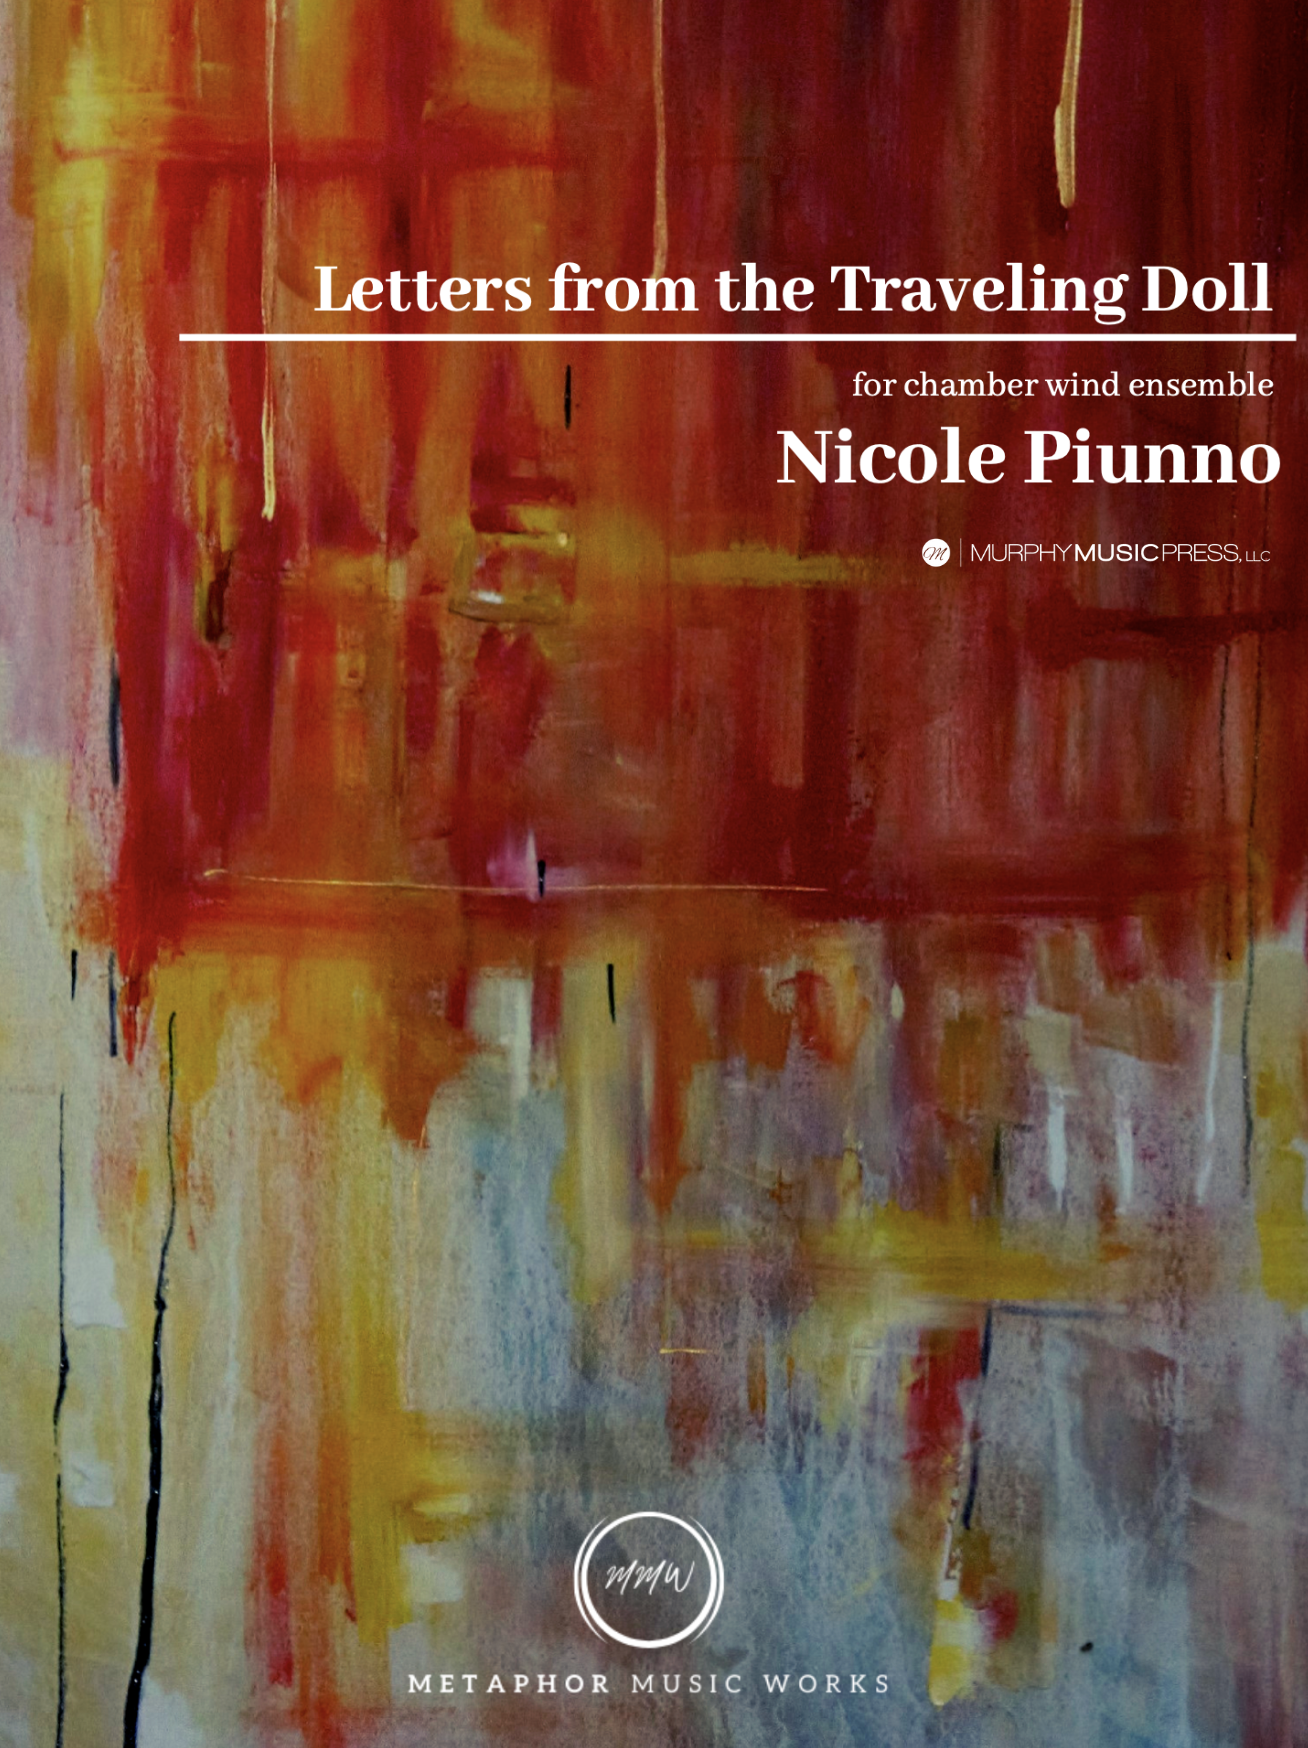 Letters From The Traveling Doll by Nicole Piunno